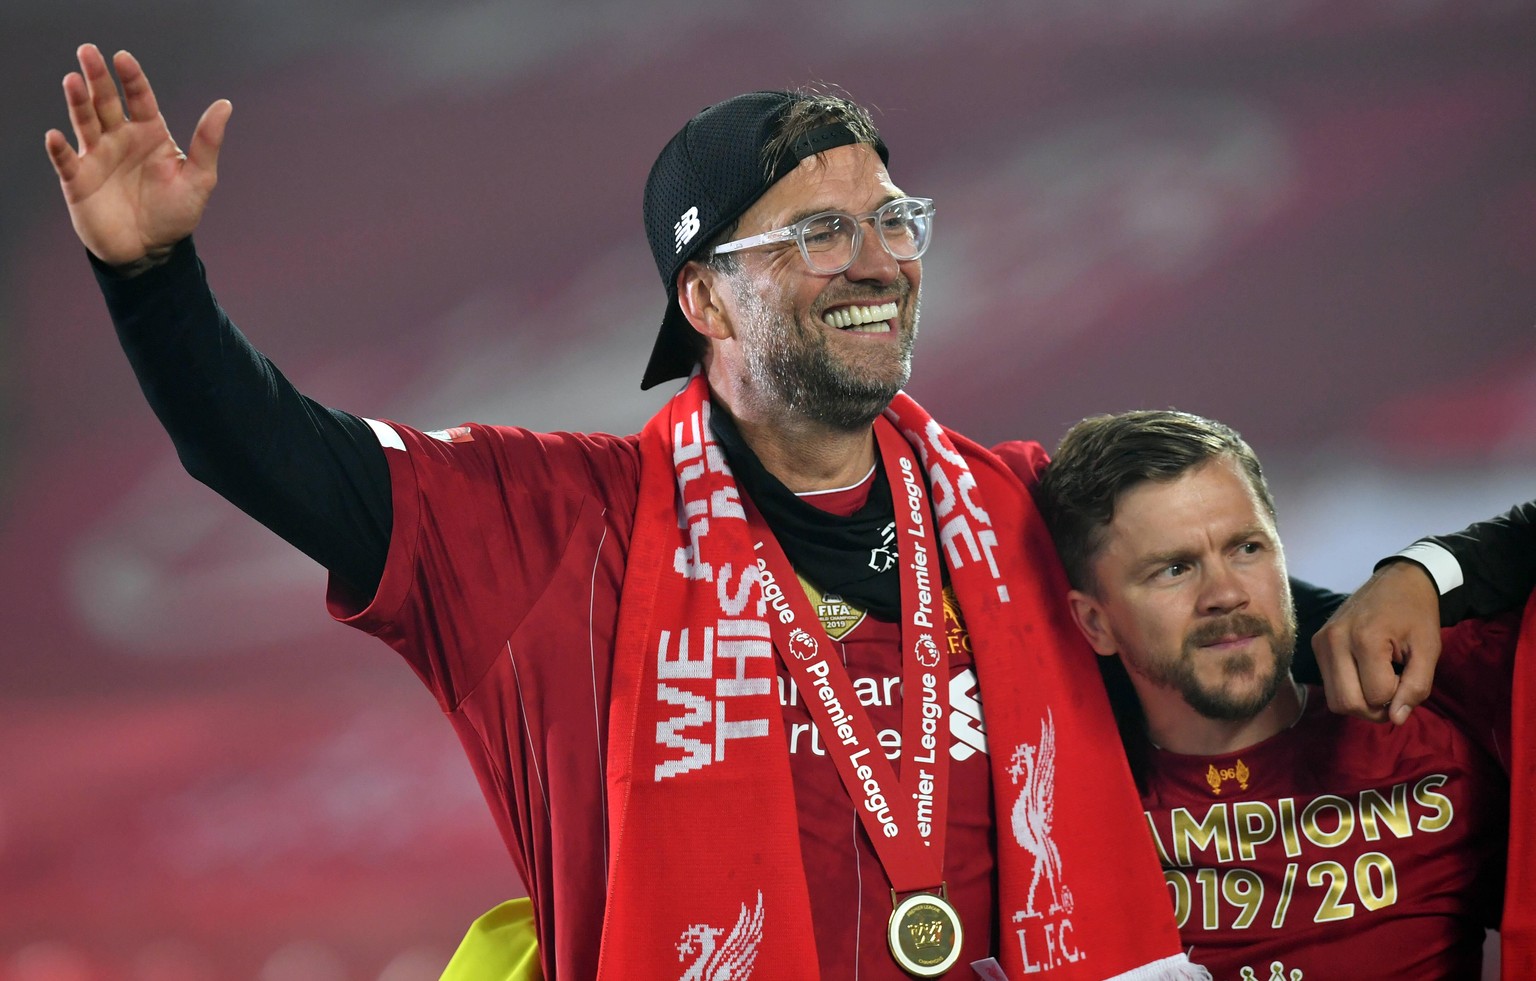 Liverpool v Chelsea - Premier League - Anfield Liverpool manager Jurgen Klopp following the trophy presentation at Anfield Stadium. EDITORIAL USE ONLY No use with unauthorised audio, video, data, fixt ...